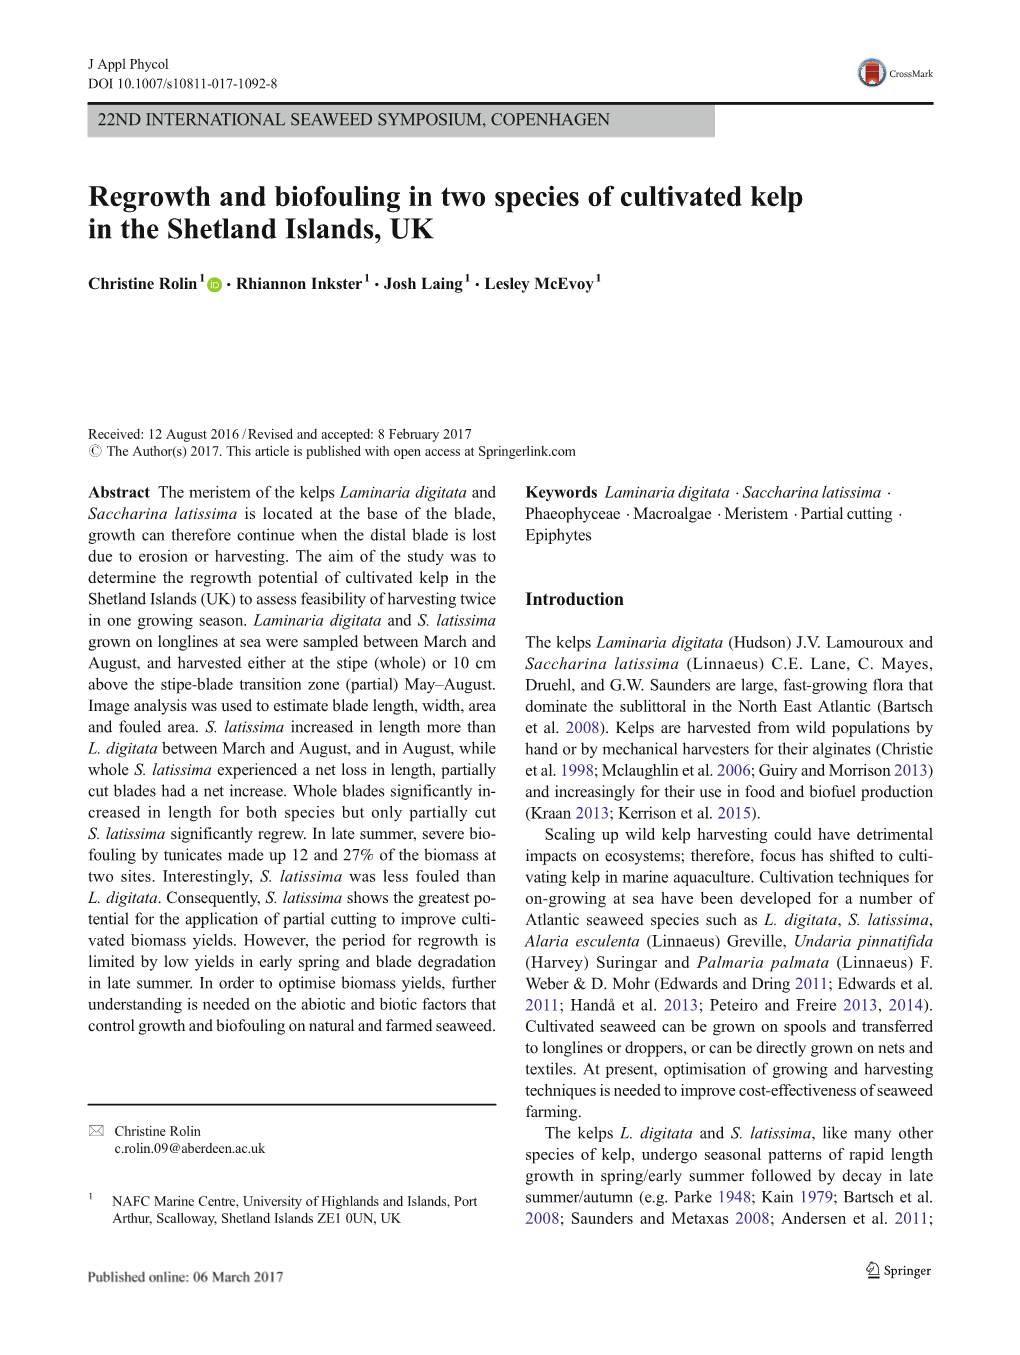 Regrowth and Biofouling in Two Species of Cultivated Kelp in the Shetland Islands, UK